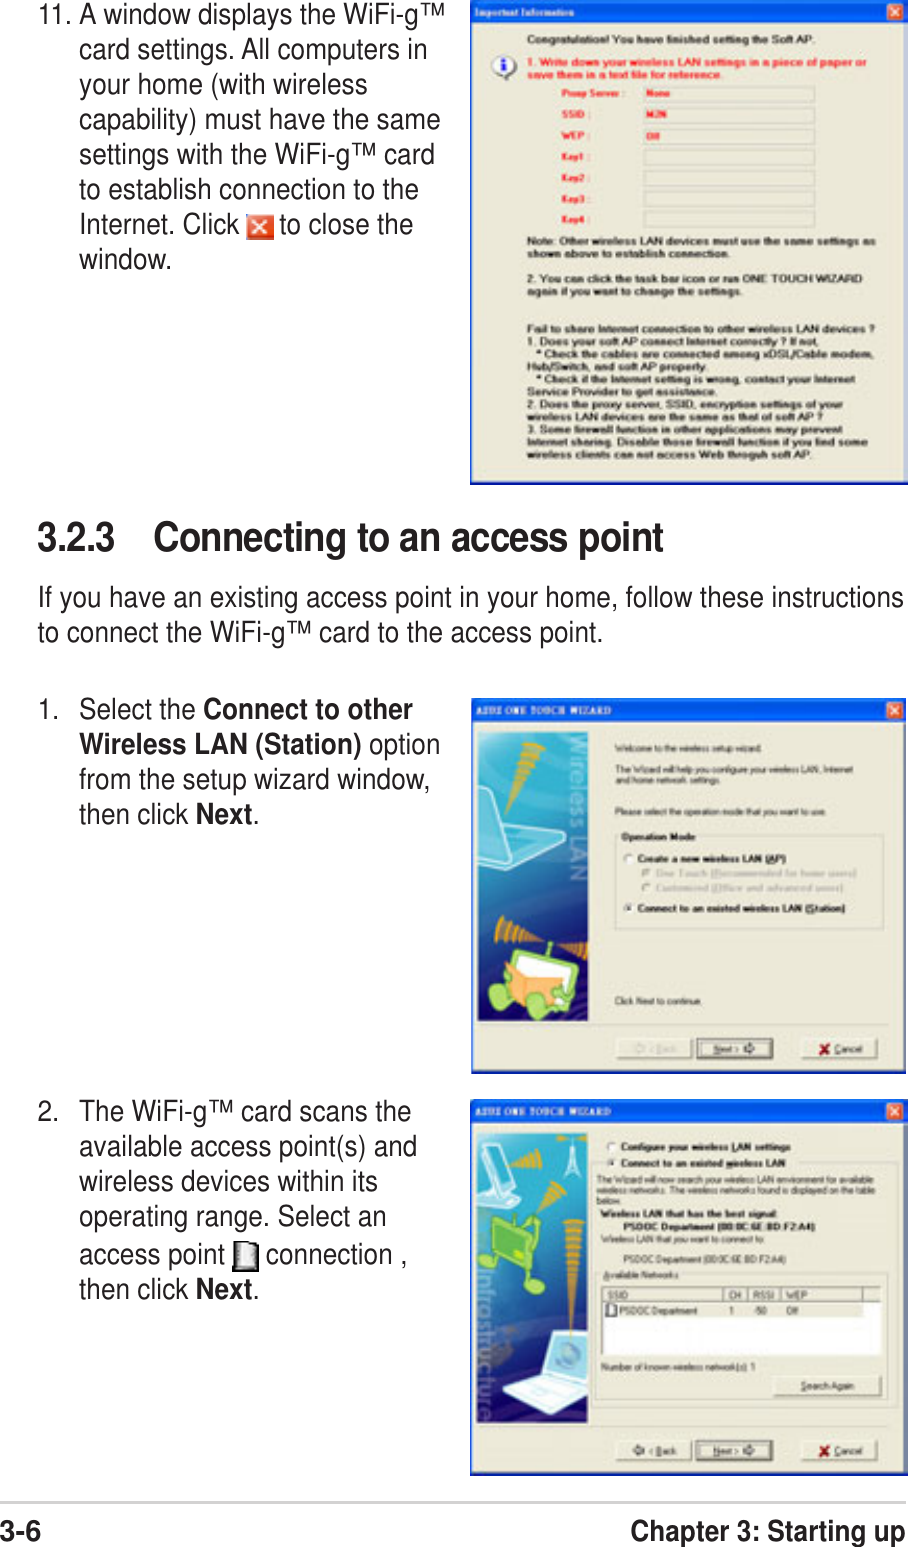 3-6Chapter 3: Starting up3.2.3 Connecting to an access pointIf you have an existing access point in your home, follow these instructionsto connect the WiFi-g™ card to the access point.1. Select the Connect to otherWireless LAN (Station) optionfrom the setup wizard window,then click Next.2. The WiFi-g™ card scans theavailable access point(s) andwireless devices within itsoperating range. Select anaccess point   connection ,then click Next.11. A window displays the WiFi-g™card settings. All computers inyour home (with wirelesscapability) must have the samesettings with the WiFi-g™ cardto establish connection to theInternet. Click   to close thewindow.